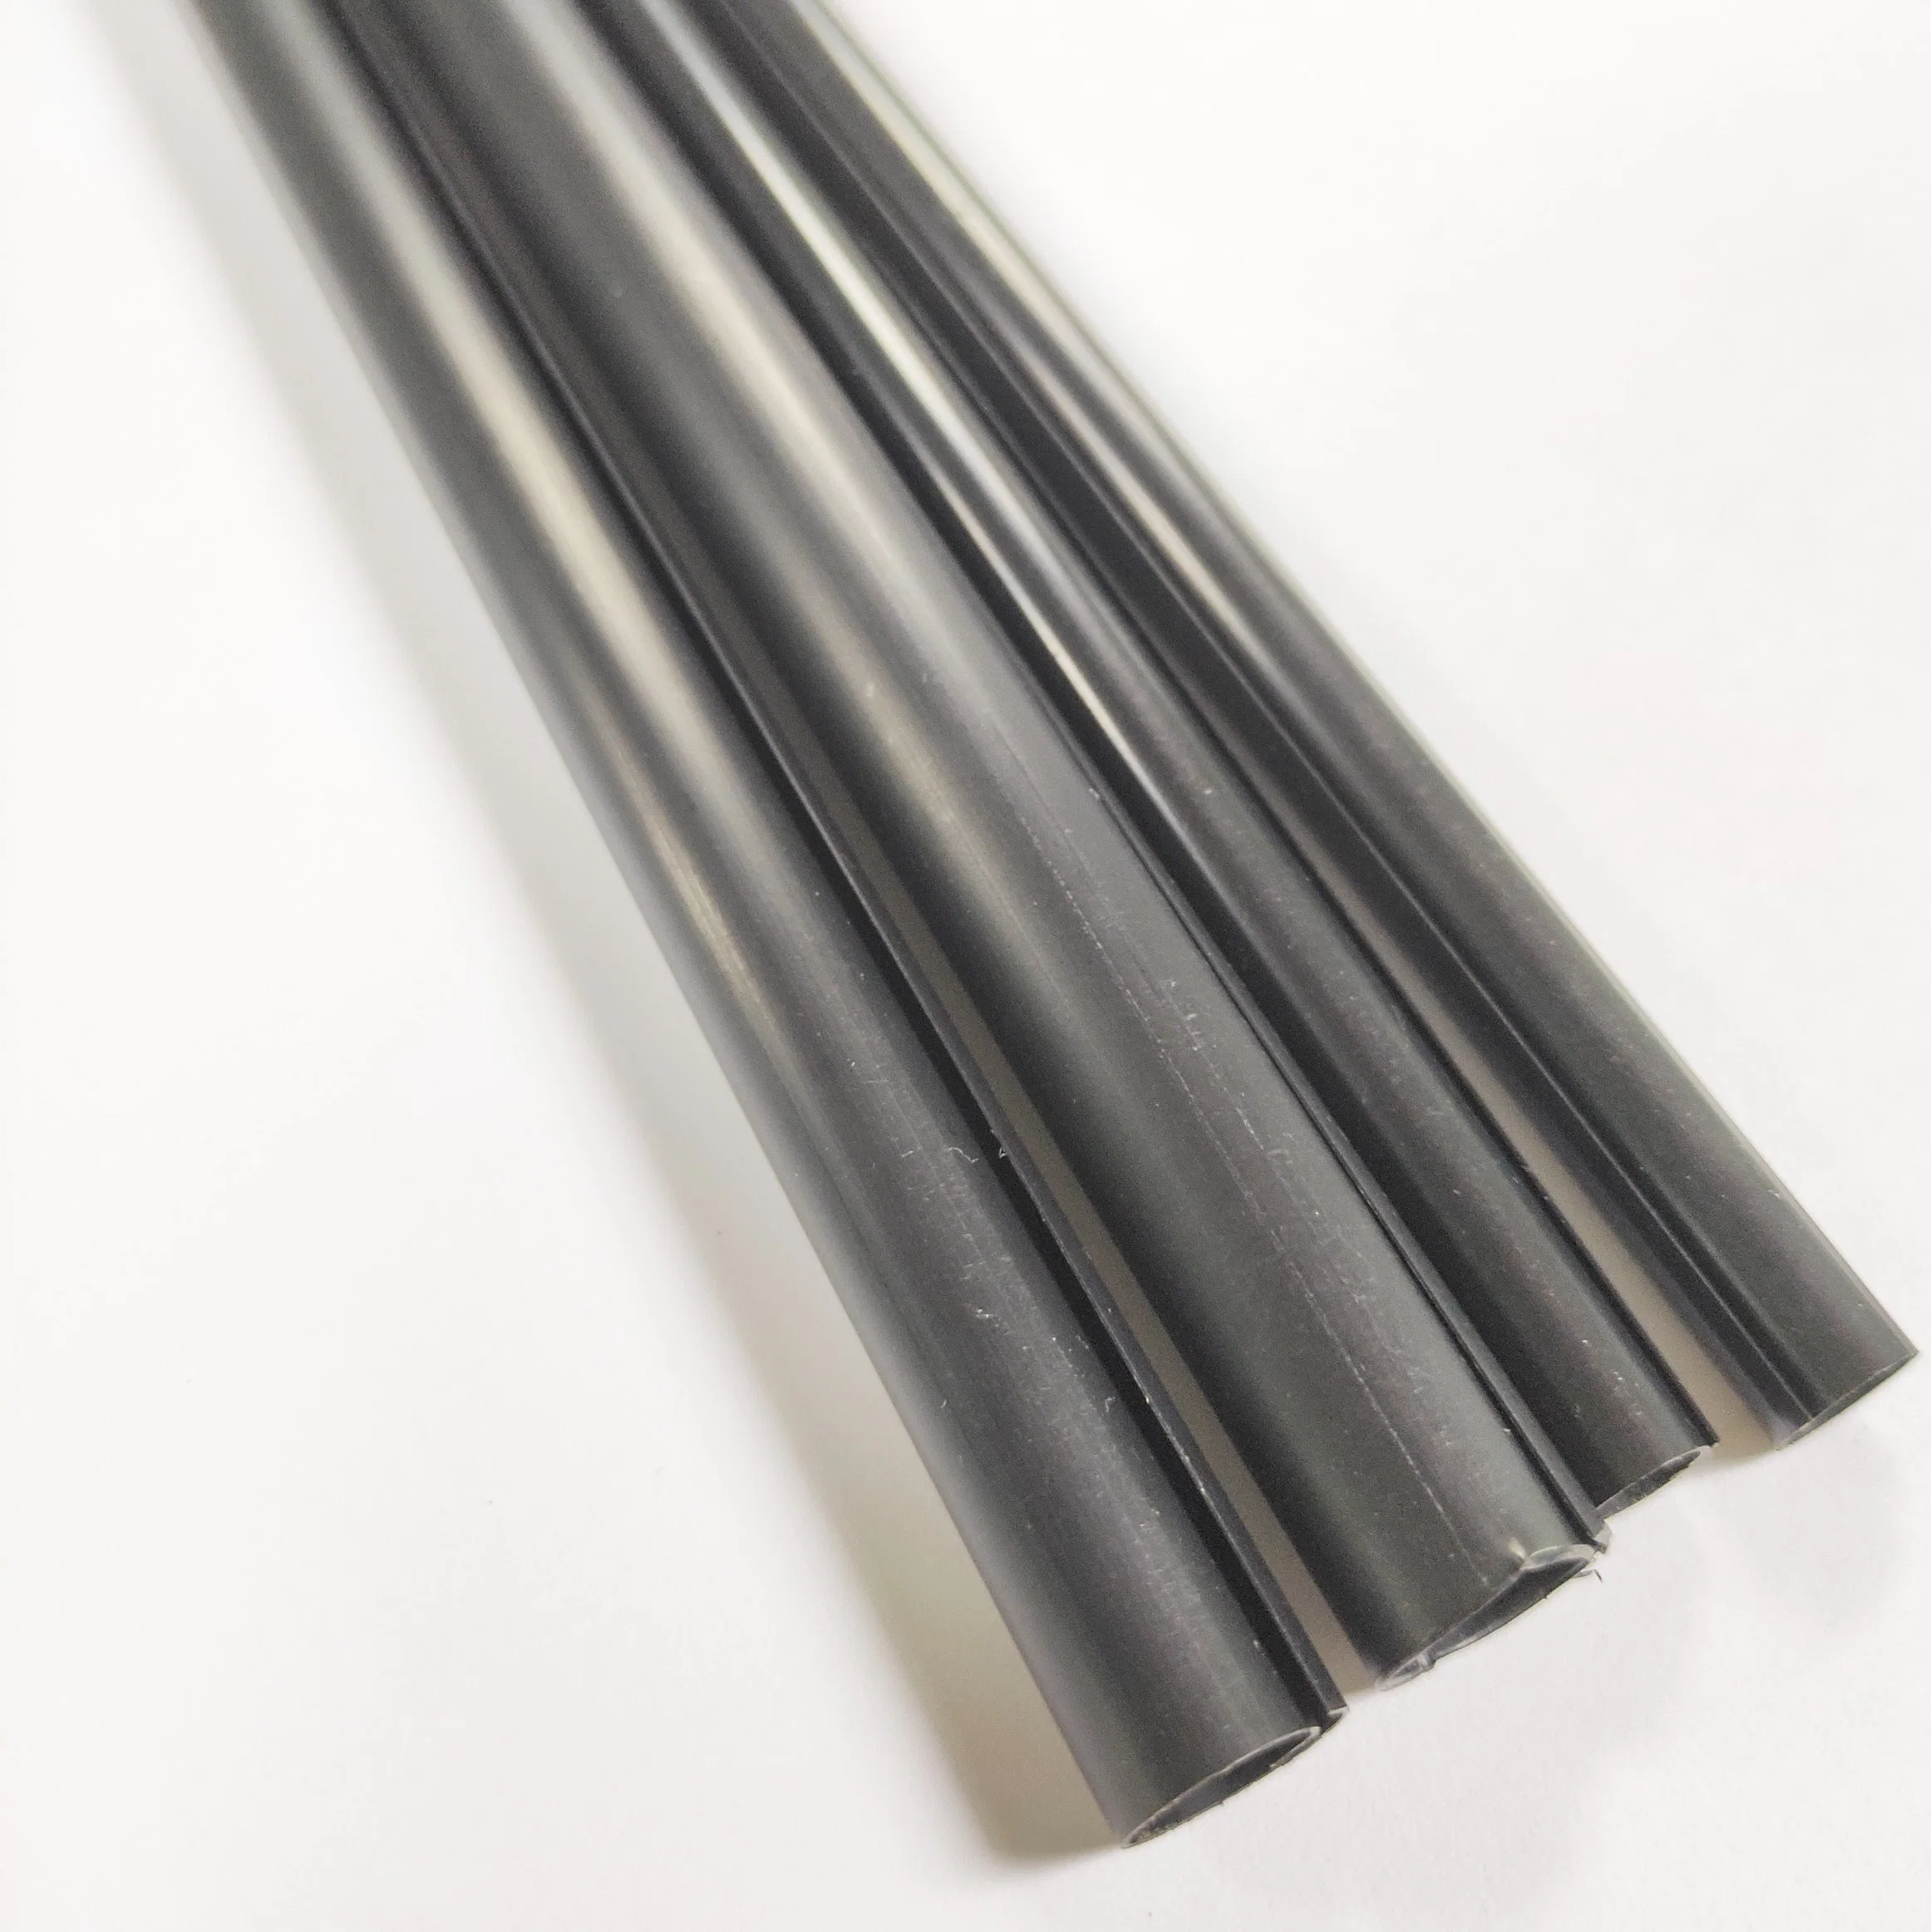 Customized PVC Material and International Standard Plastic Tube for Wires